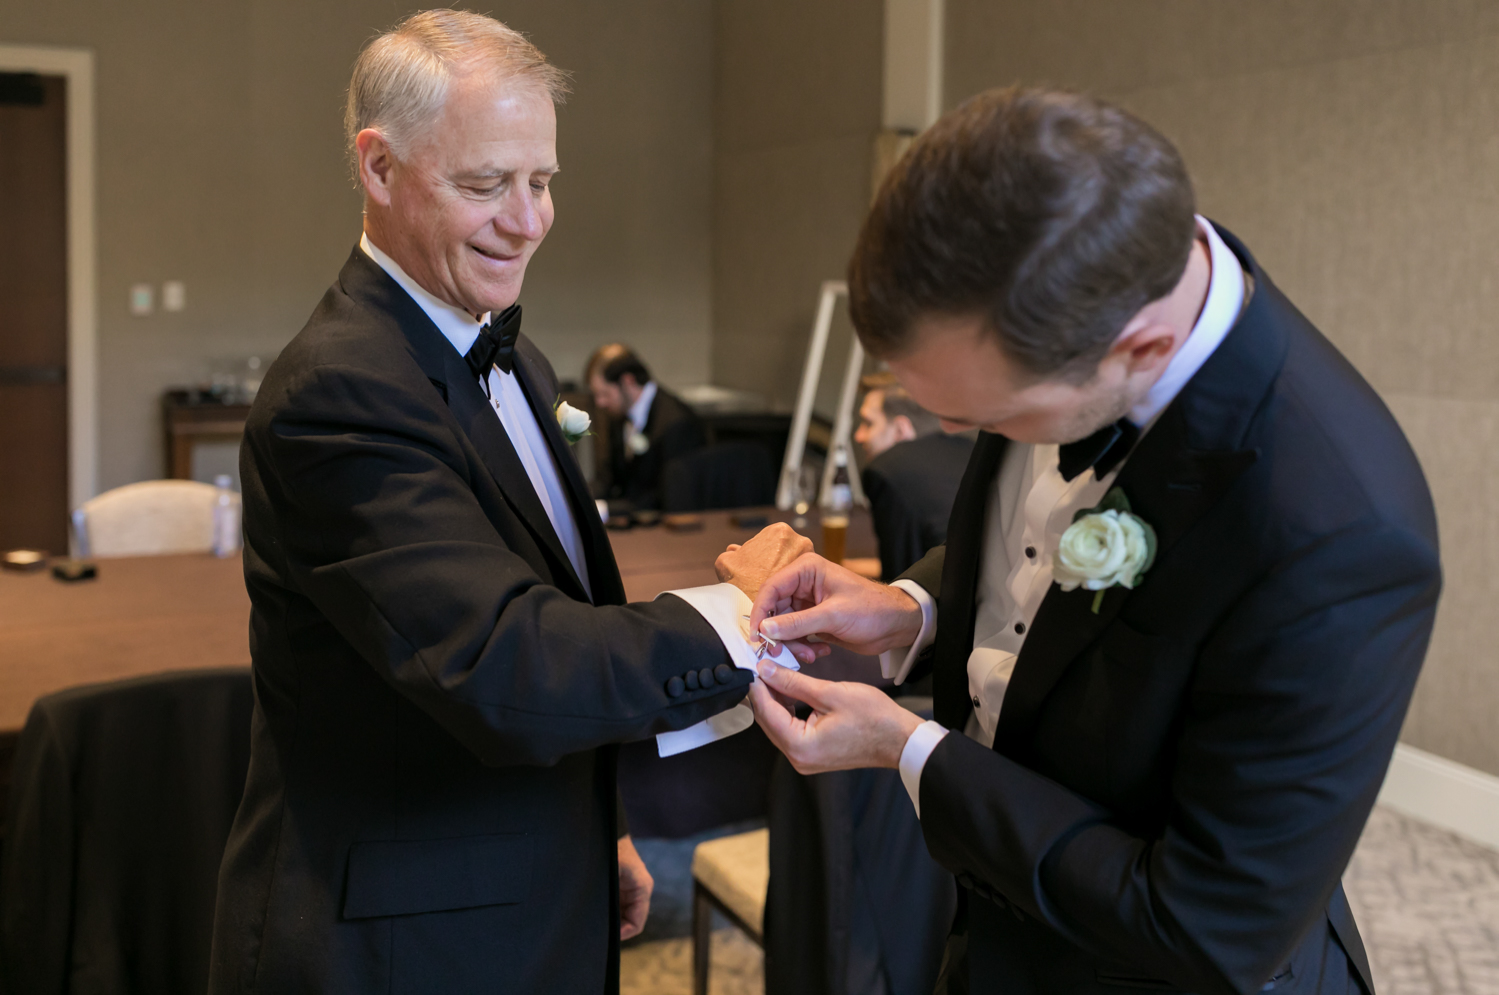 The groom pins a cufflink on his father